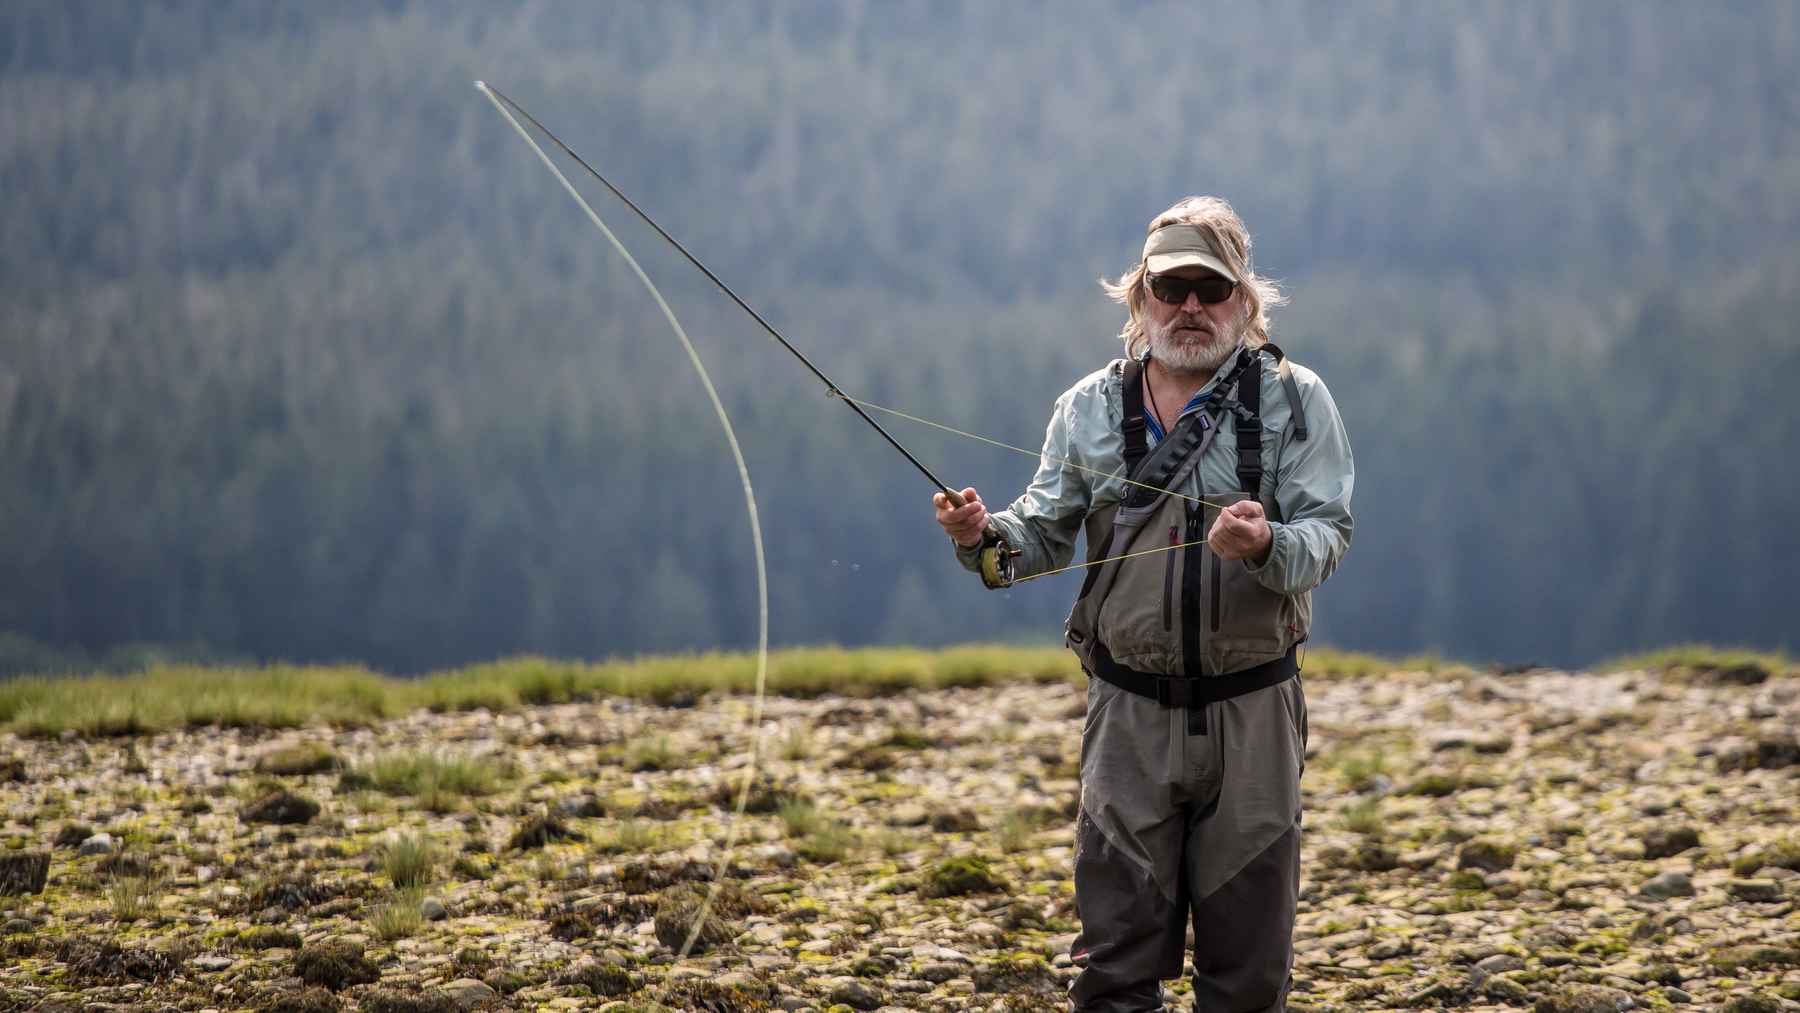 Don't blame your fly rod for your lousy casting